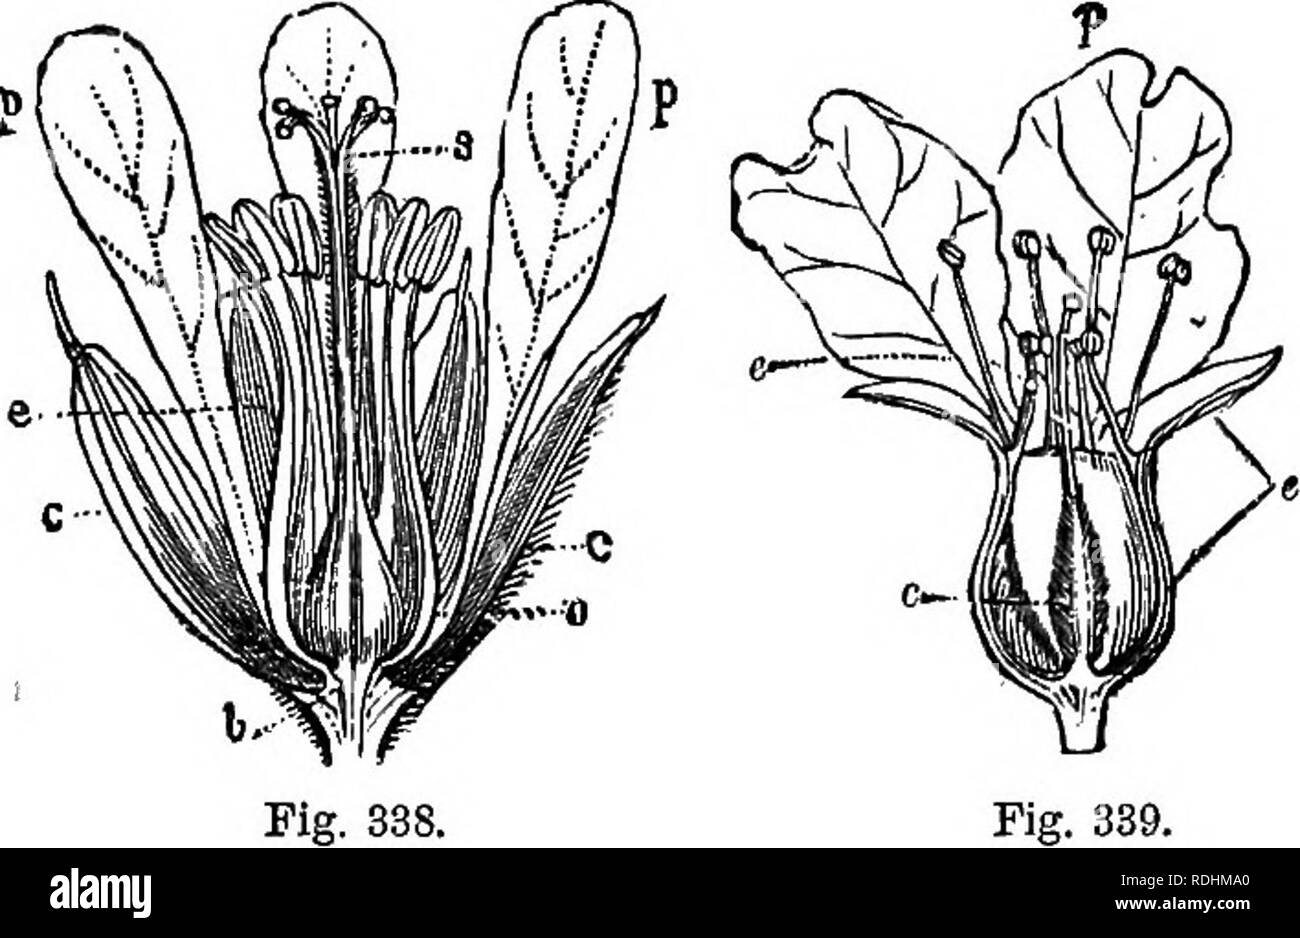 . A Manual of botany : being an introduction to the study of the structure, physiology, and classification of plants . Botany. Fig. 337.. Fig. 339. When the union of the parts of the flower is such that the stamens are inserted on the top of the ovary, they are epigynous (M, upon or above). In this case the torus is supposed to be united to the ovary, while the calyx is above it, and bears the stamens. In the Orchis tribe, where the stamens and pistil are united so as to form a column, the flowers are said to be gynandrous. In Aralia spinosa (fig. 340), aU the whorls, calyx, c, petals, p, and  Stock Photo